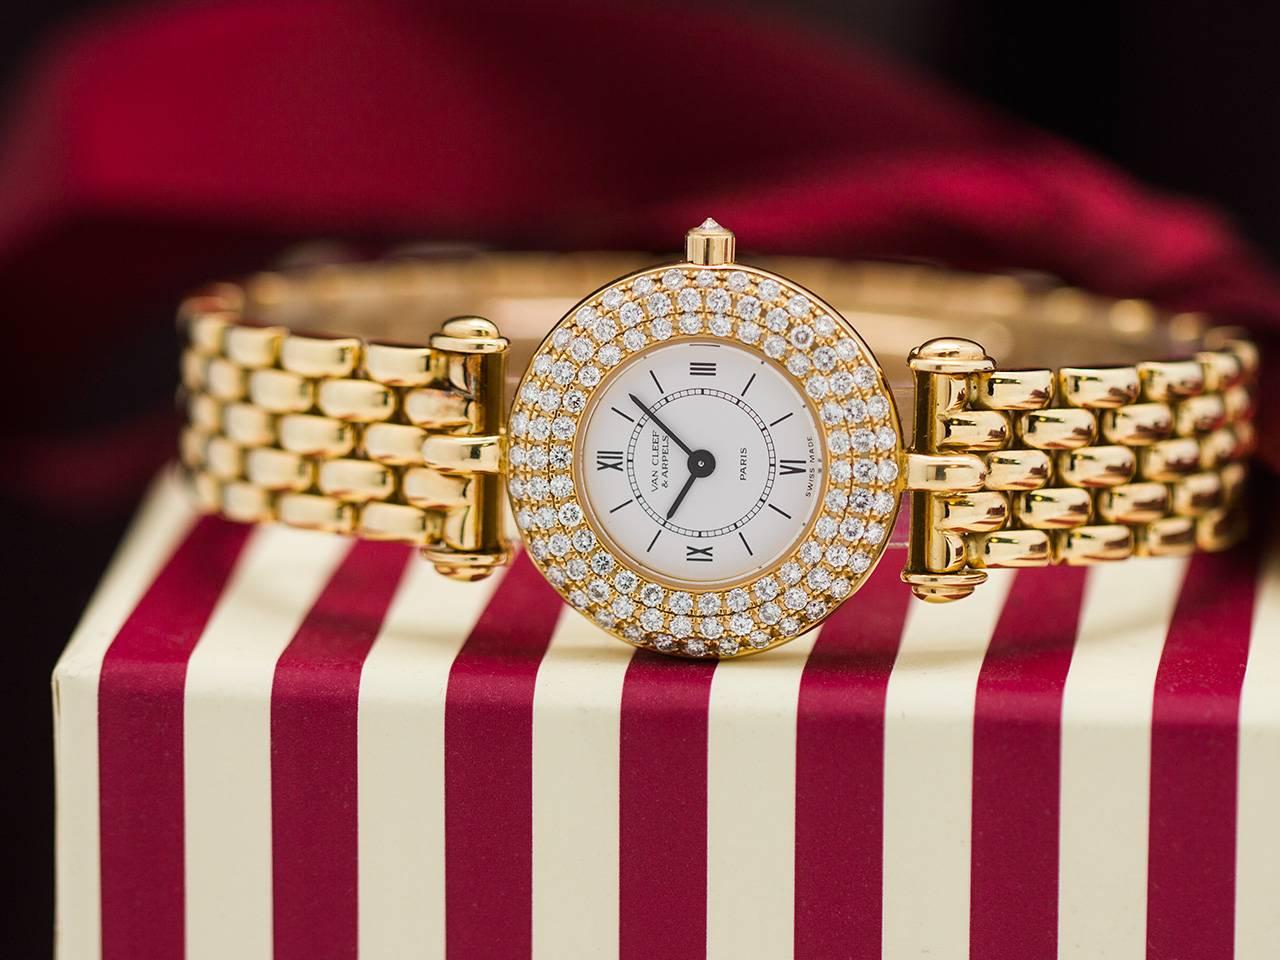 Van Cleef & Arpels 18K YG diamond set lady’s sport model. Beautifully designed and finely executed lady sporty size model set with 3 rows of fine diamonds and diamond set crown. With heavy rice link style bracelet with hidden deployment clasp.